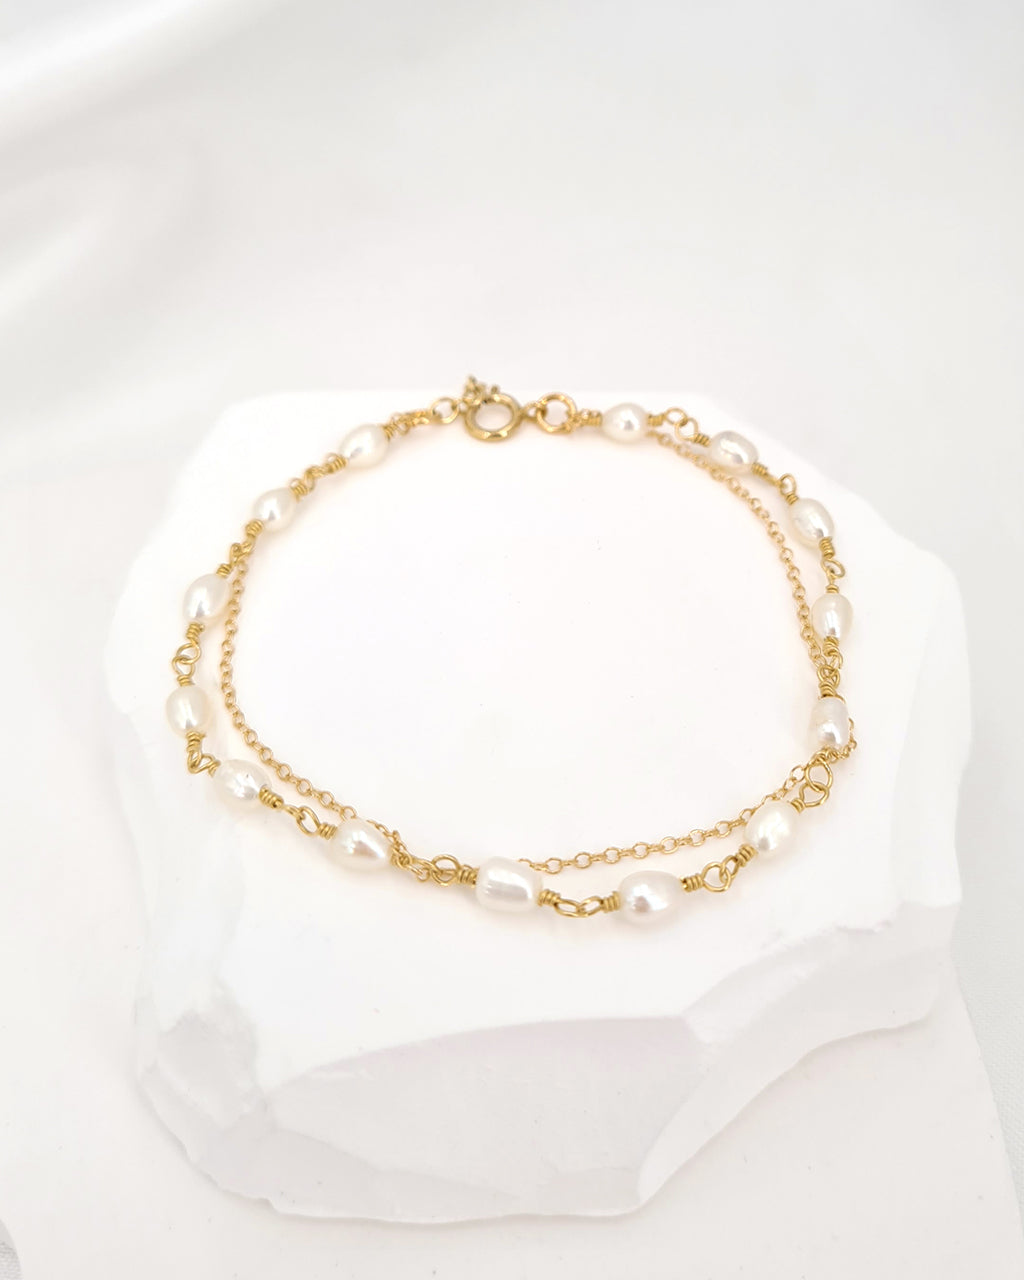 Tiny Pearl Bracelet, White Freshwater Pearl 14k gold filled bracelet, Wedding jewelry for brides and bridesmaids